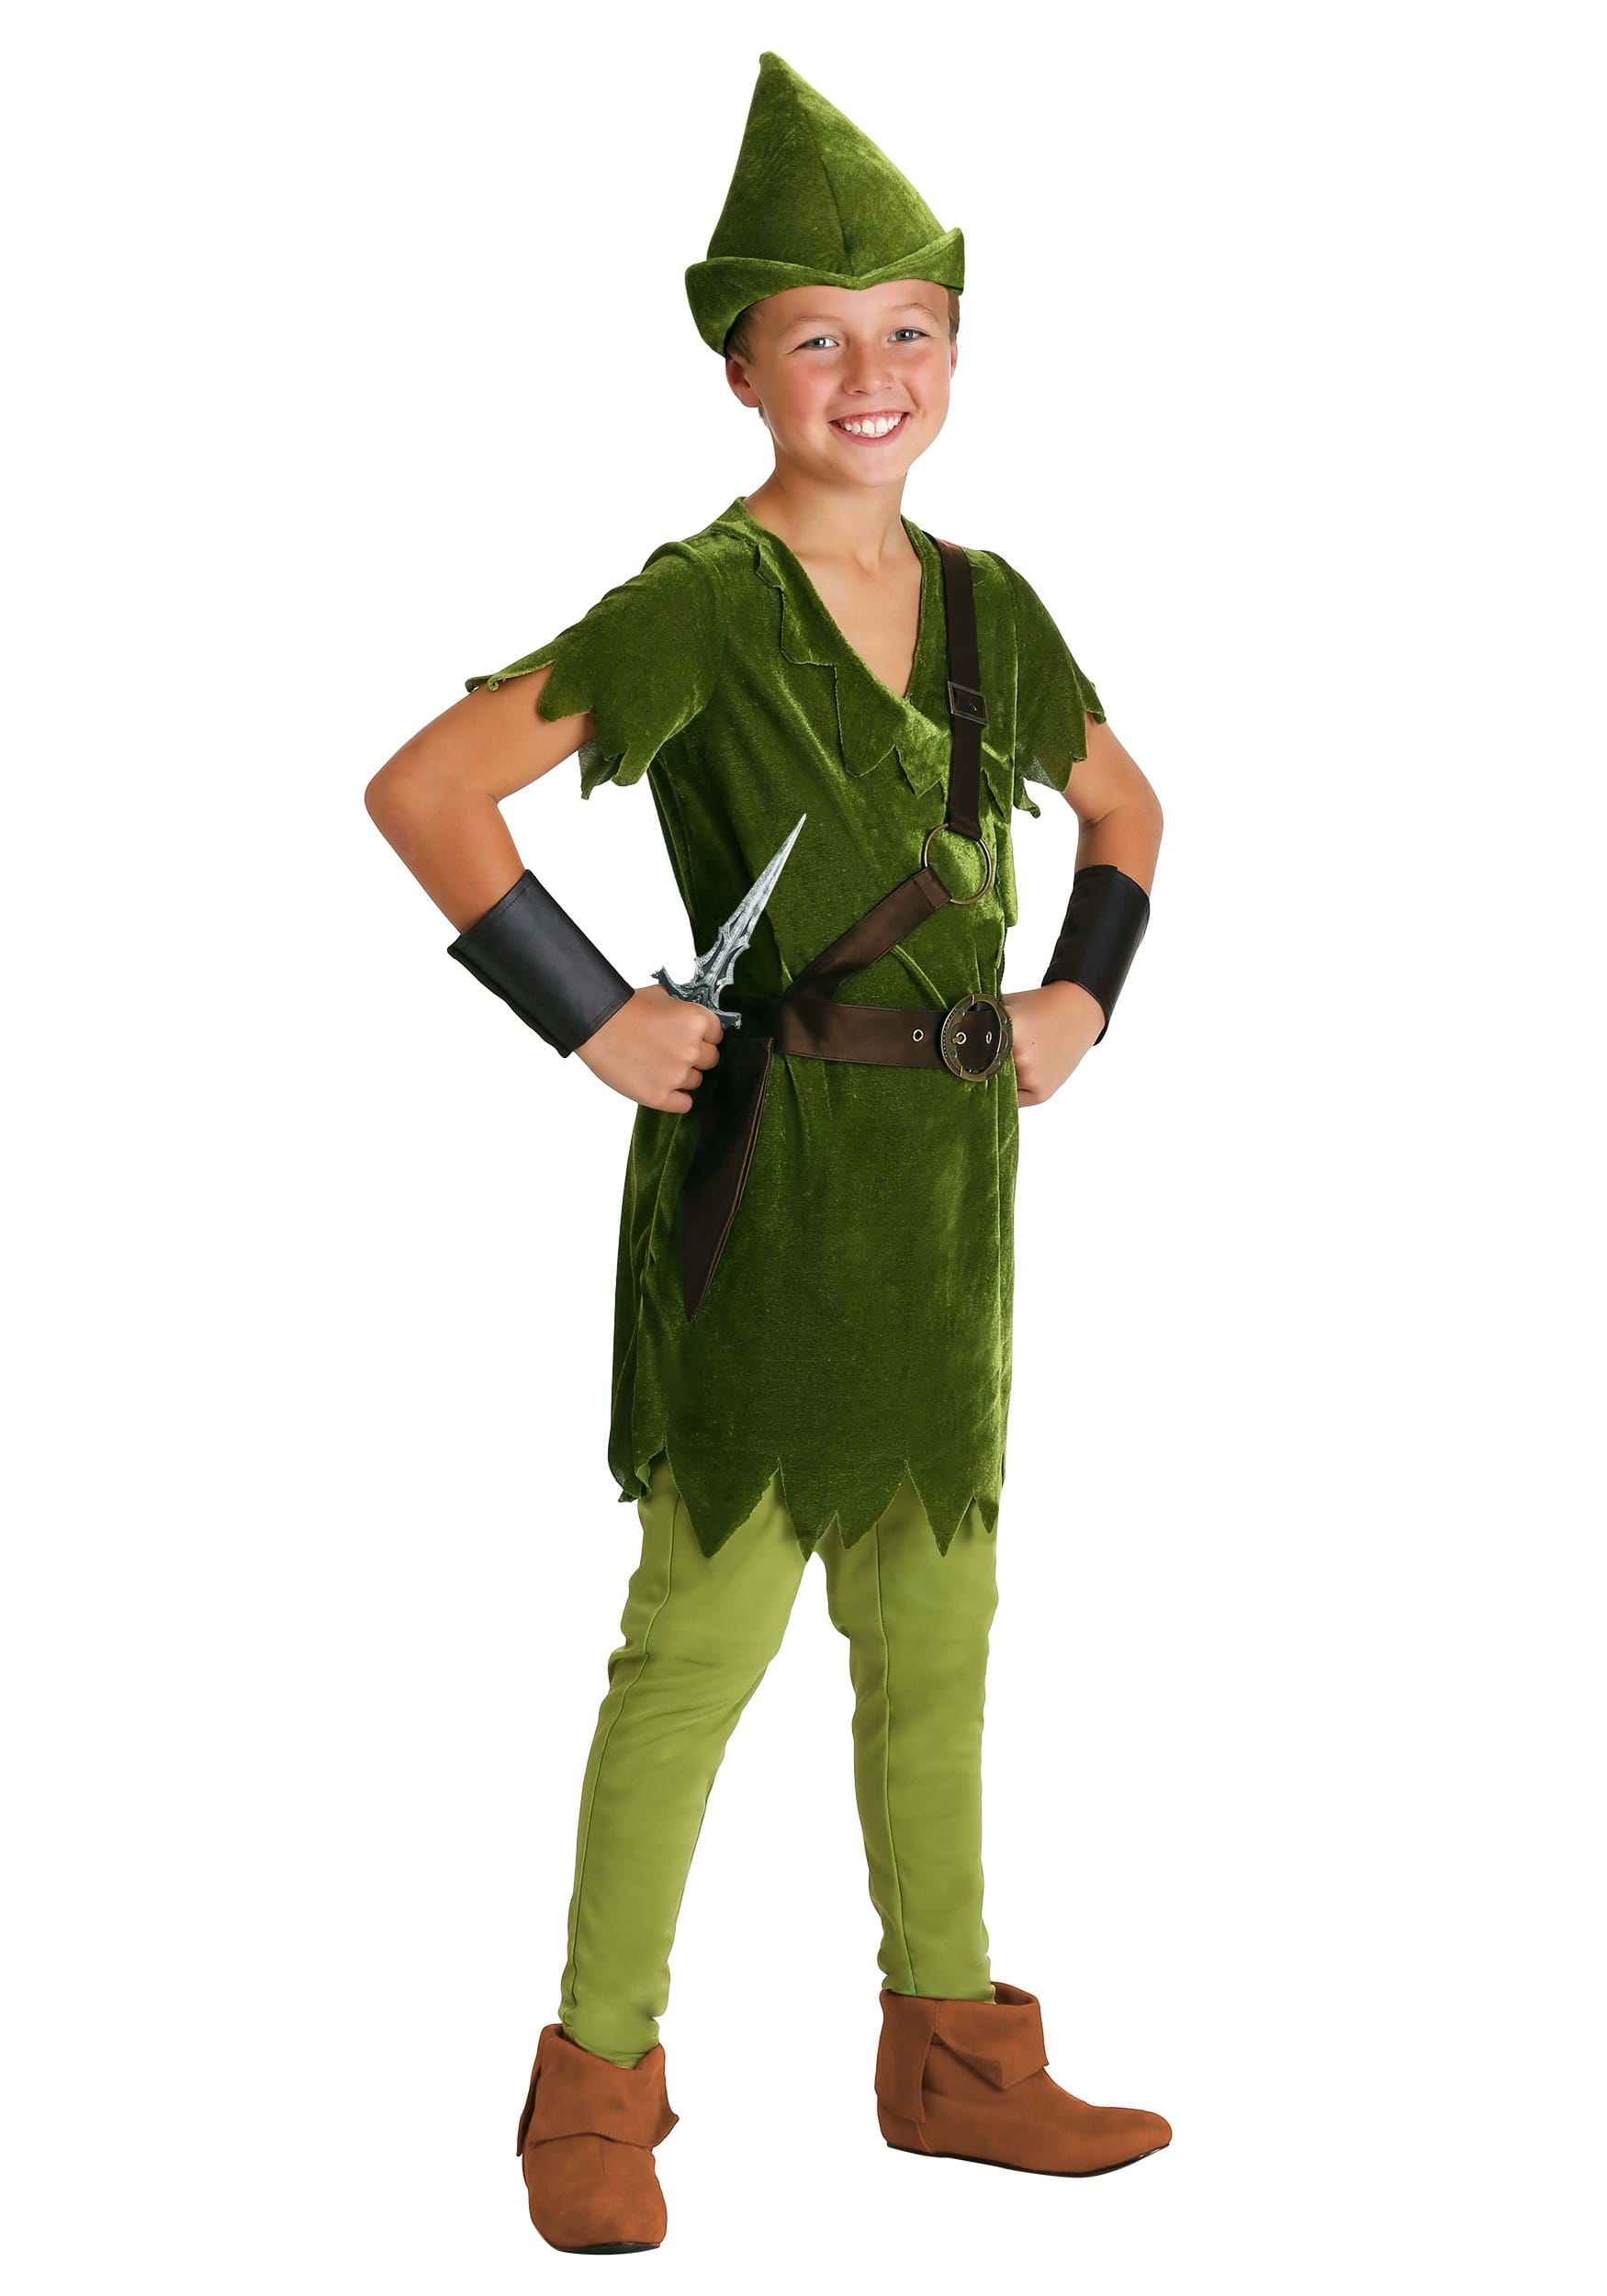 https://images.halloweencostumes.ca/products/46289/1-1/child-classic-peter-pan-costume-plain-upd.jpg